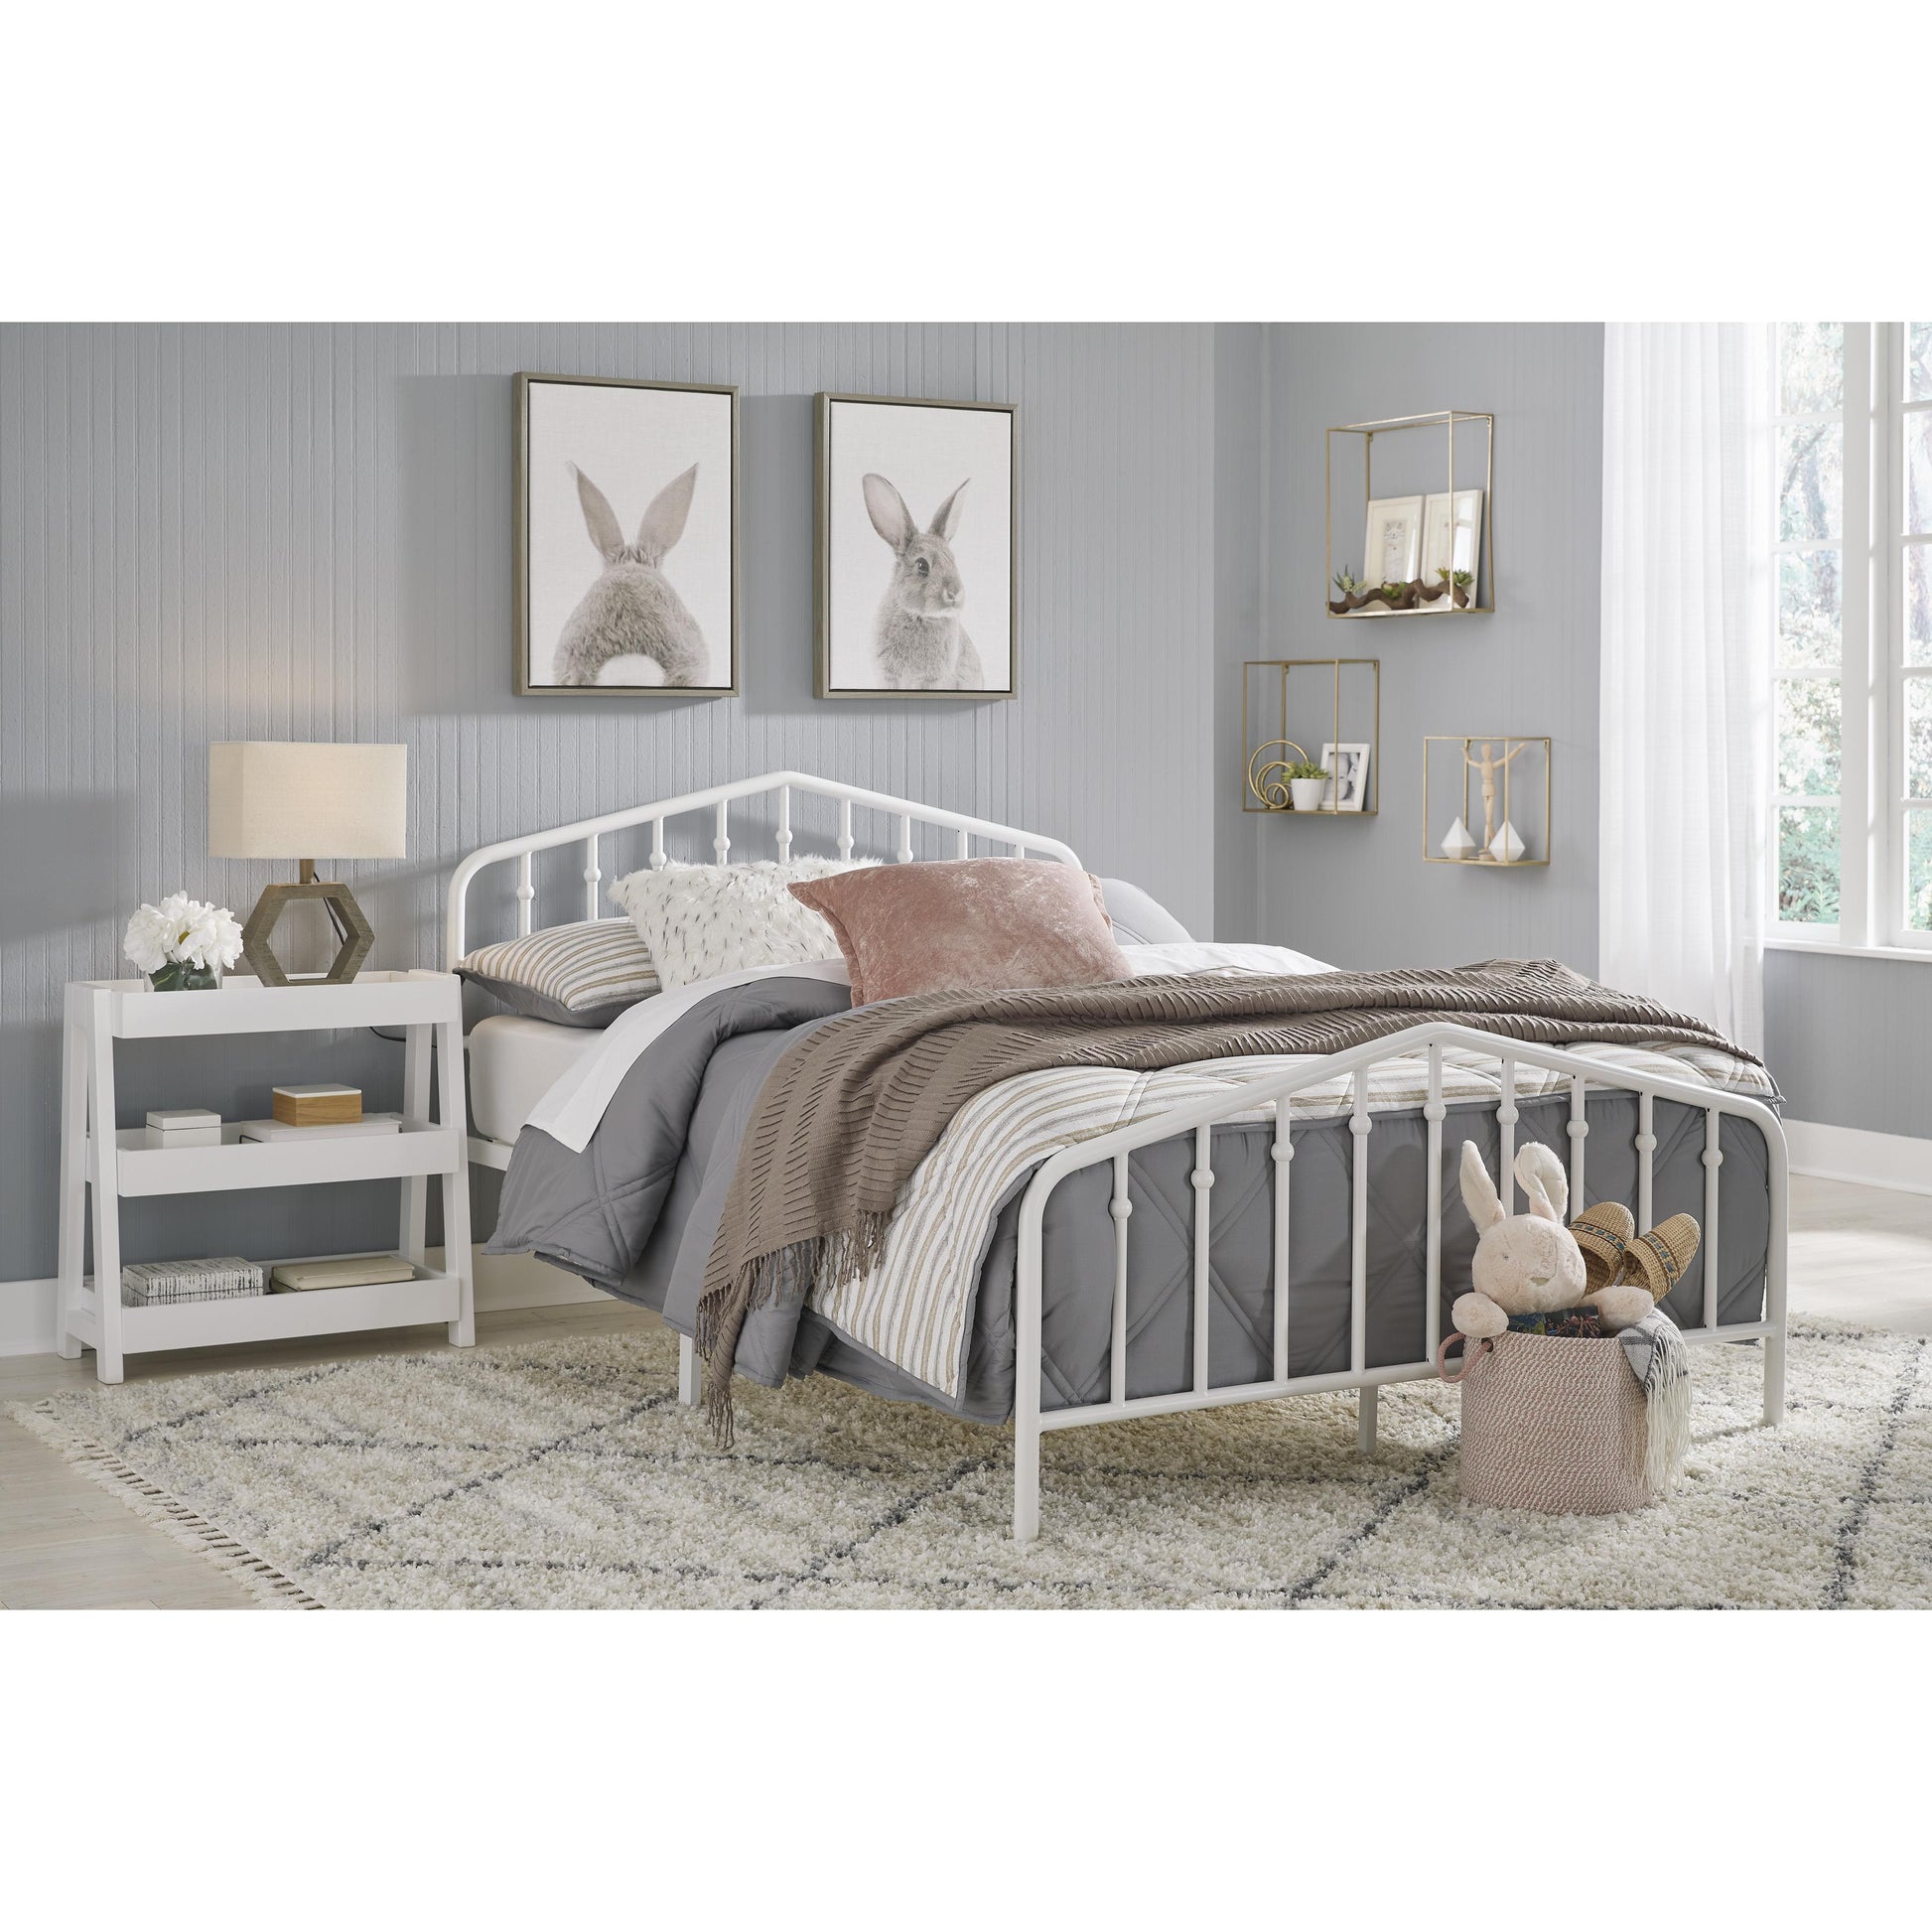 Signature Design by Ashley Kids Beds Bed B076-672 IMAGE 7